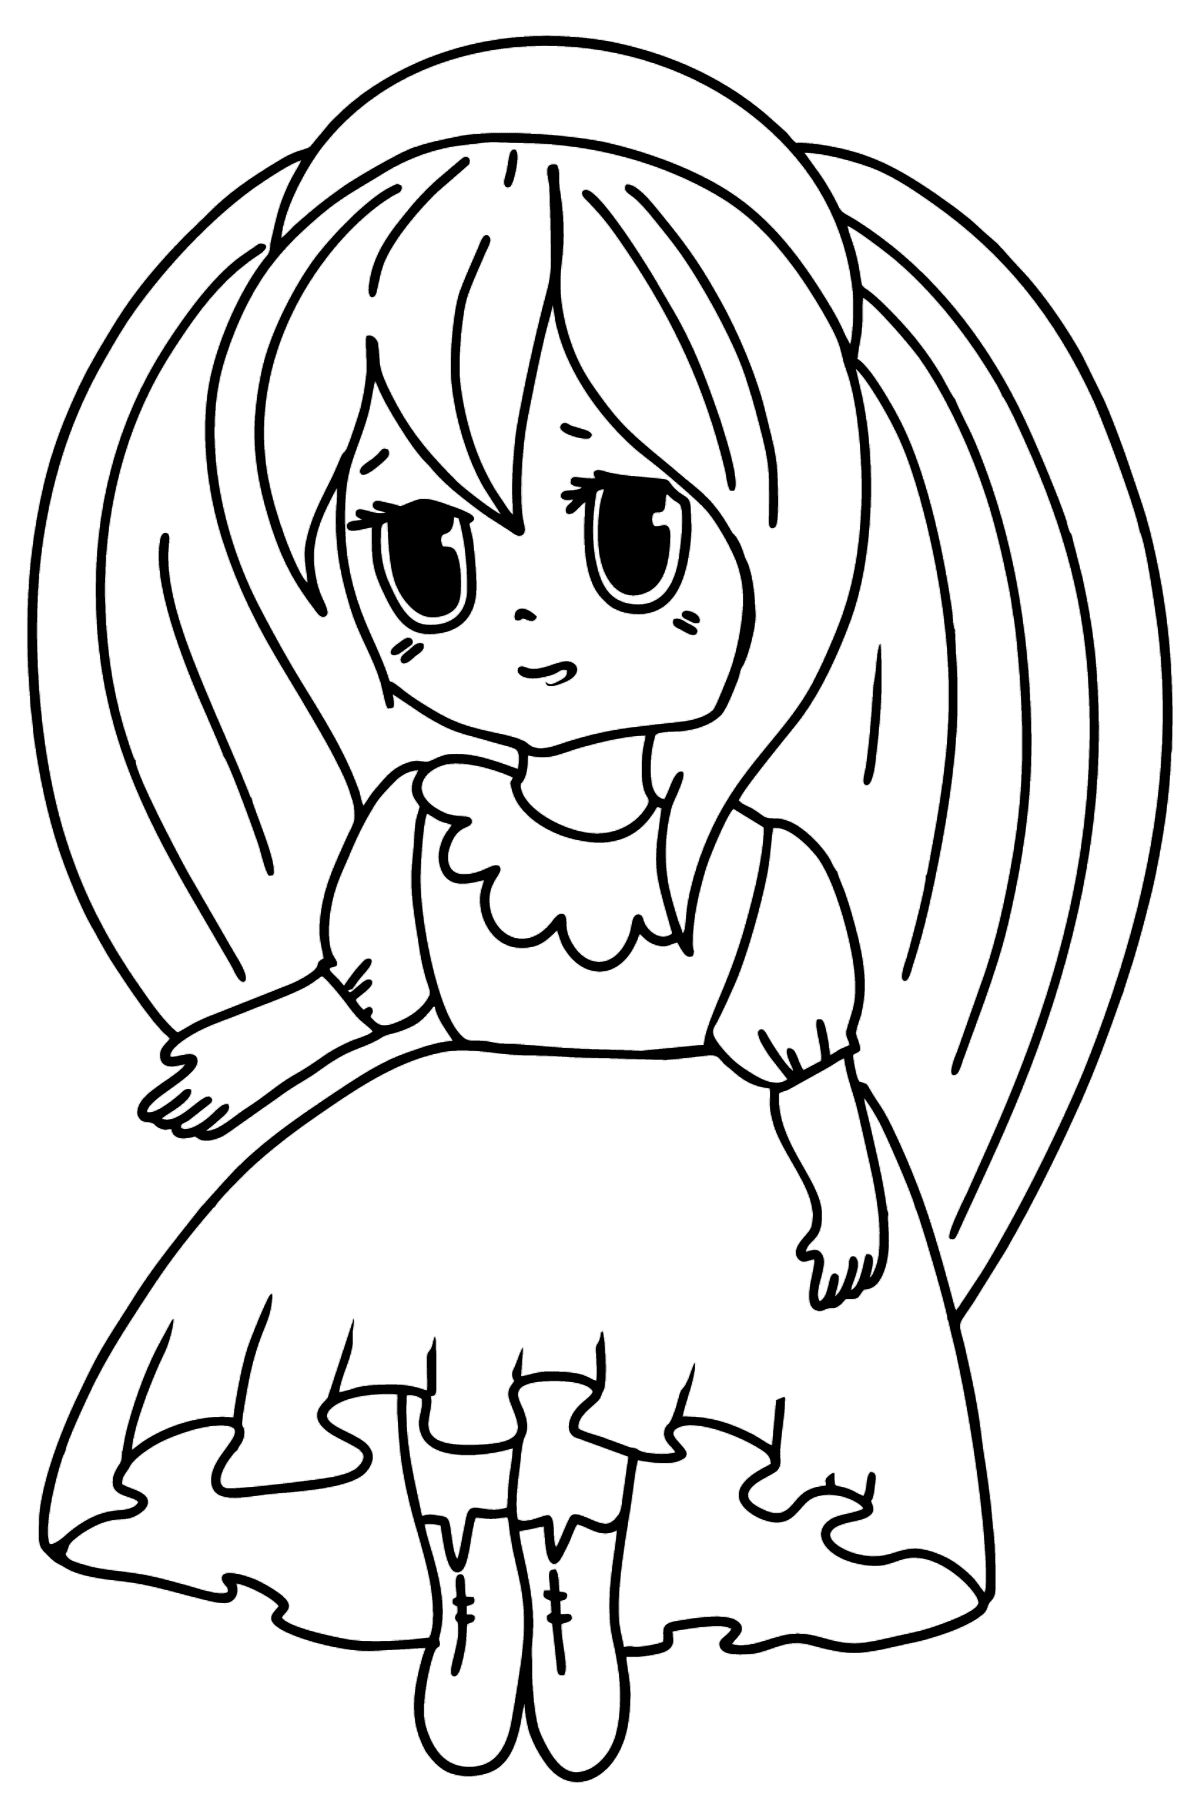 Anime Girl in Pink coloring page - Coloring Pages for Kids